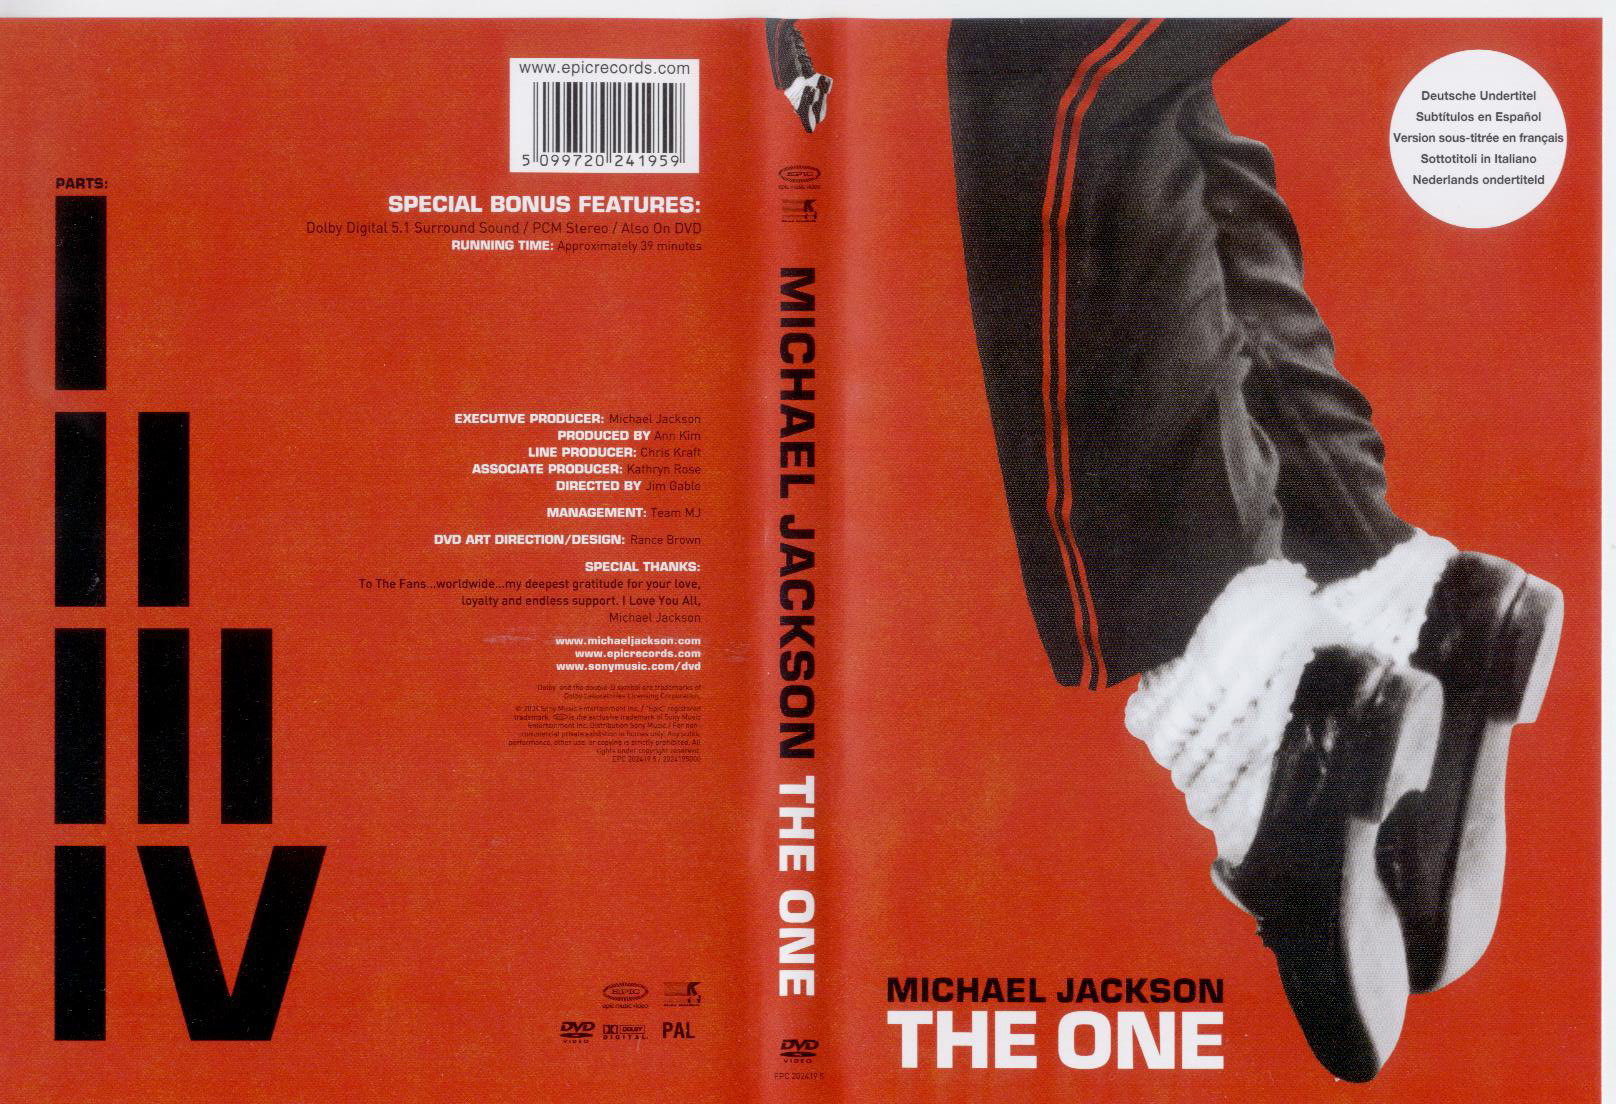 Jaquette DVD Michael Jackson the one